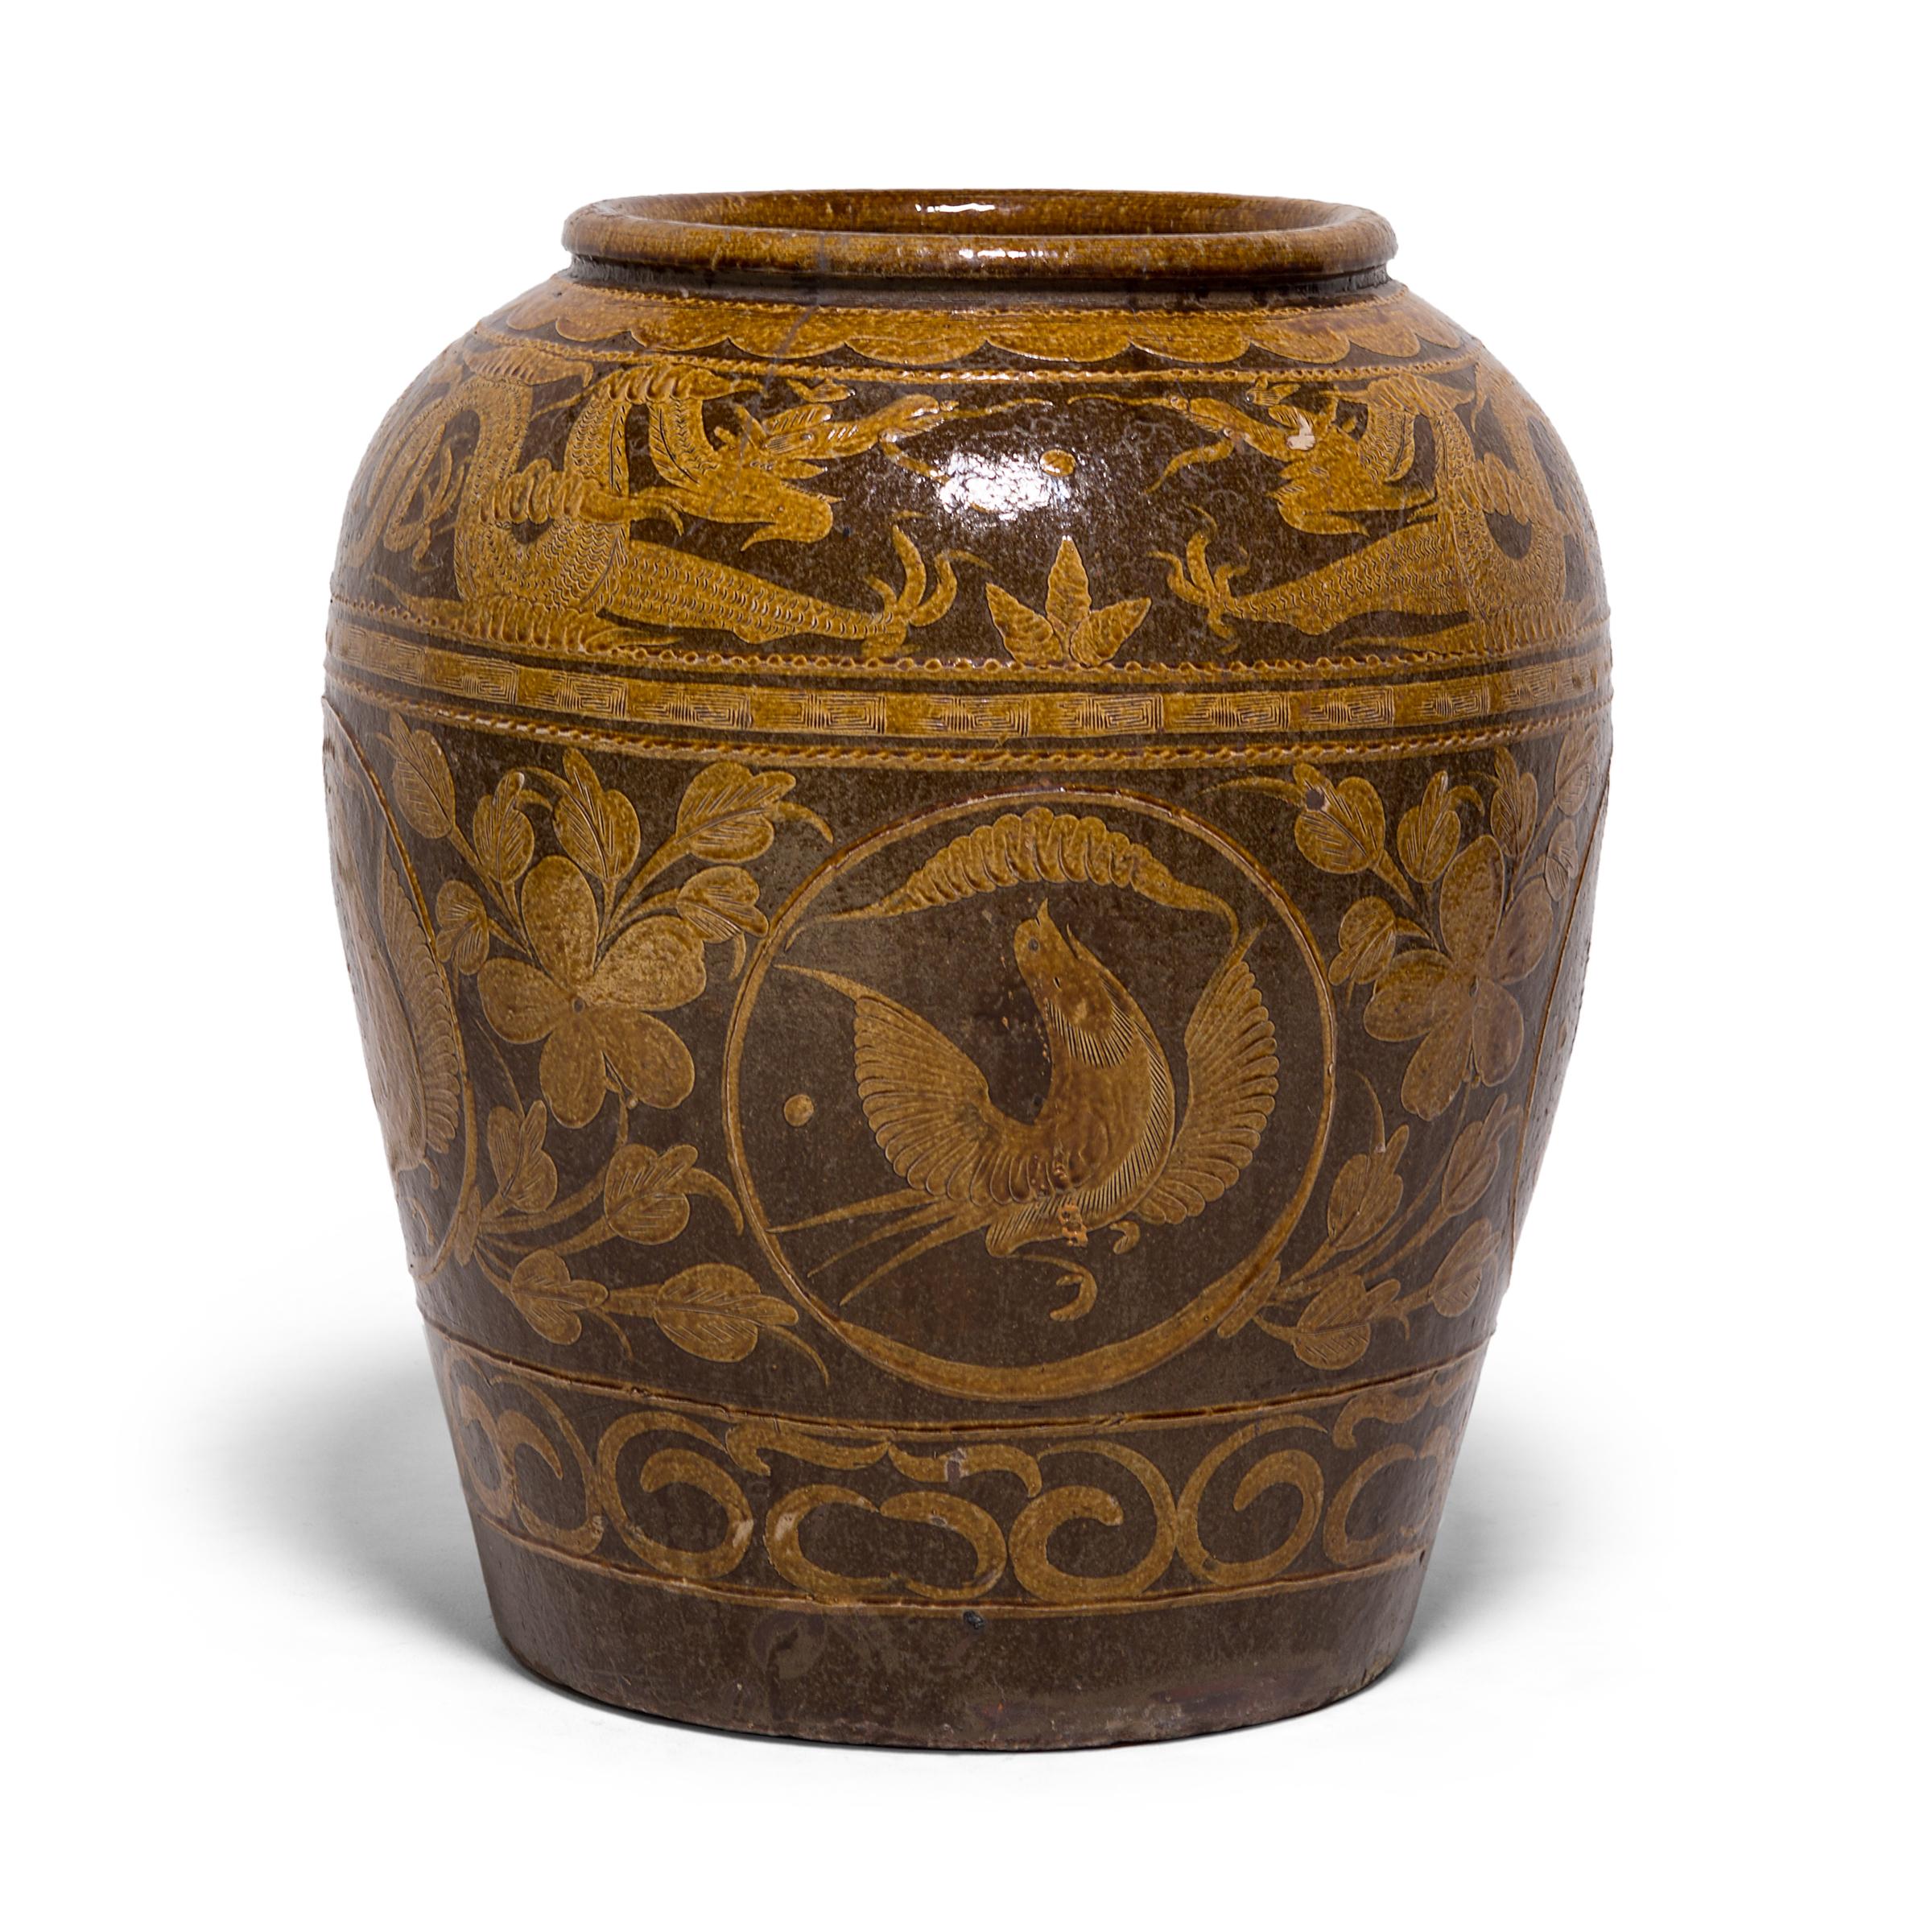 Unlike ceramics decorated with underglazing, this monumental vessel was painted after it was fired. This technique enabled the artist to build up areas and experiment with texture, visible in the stamped pattern along the painted bands and in the